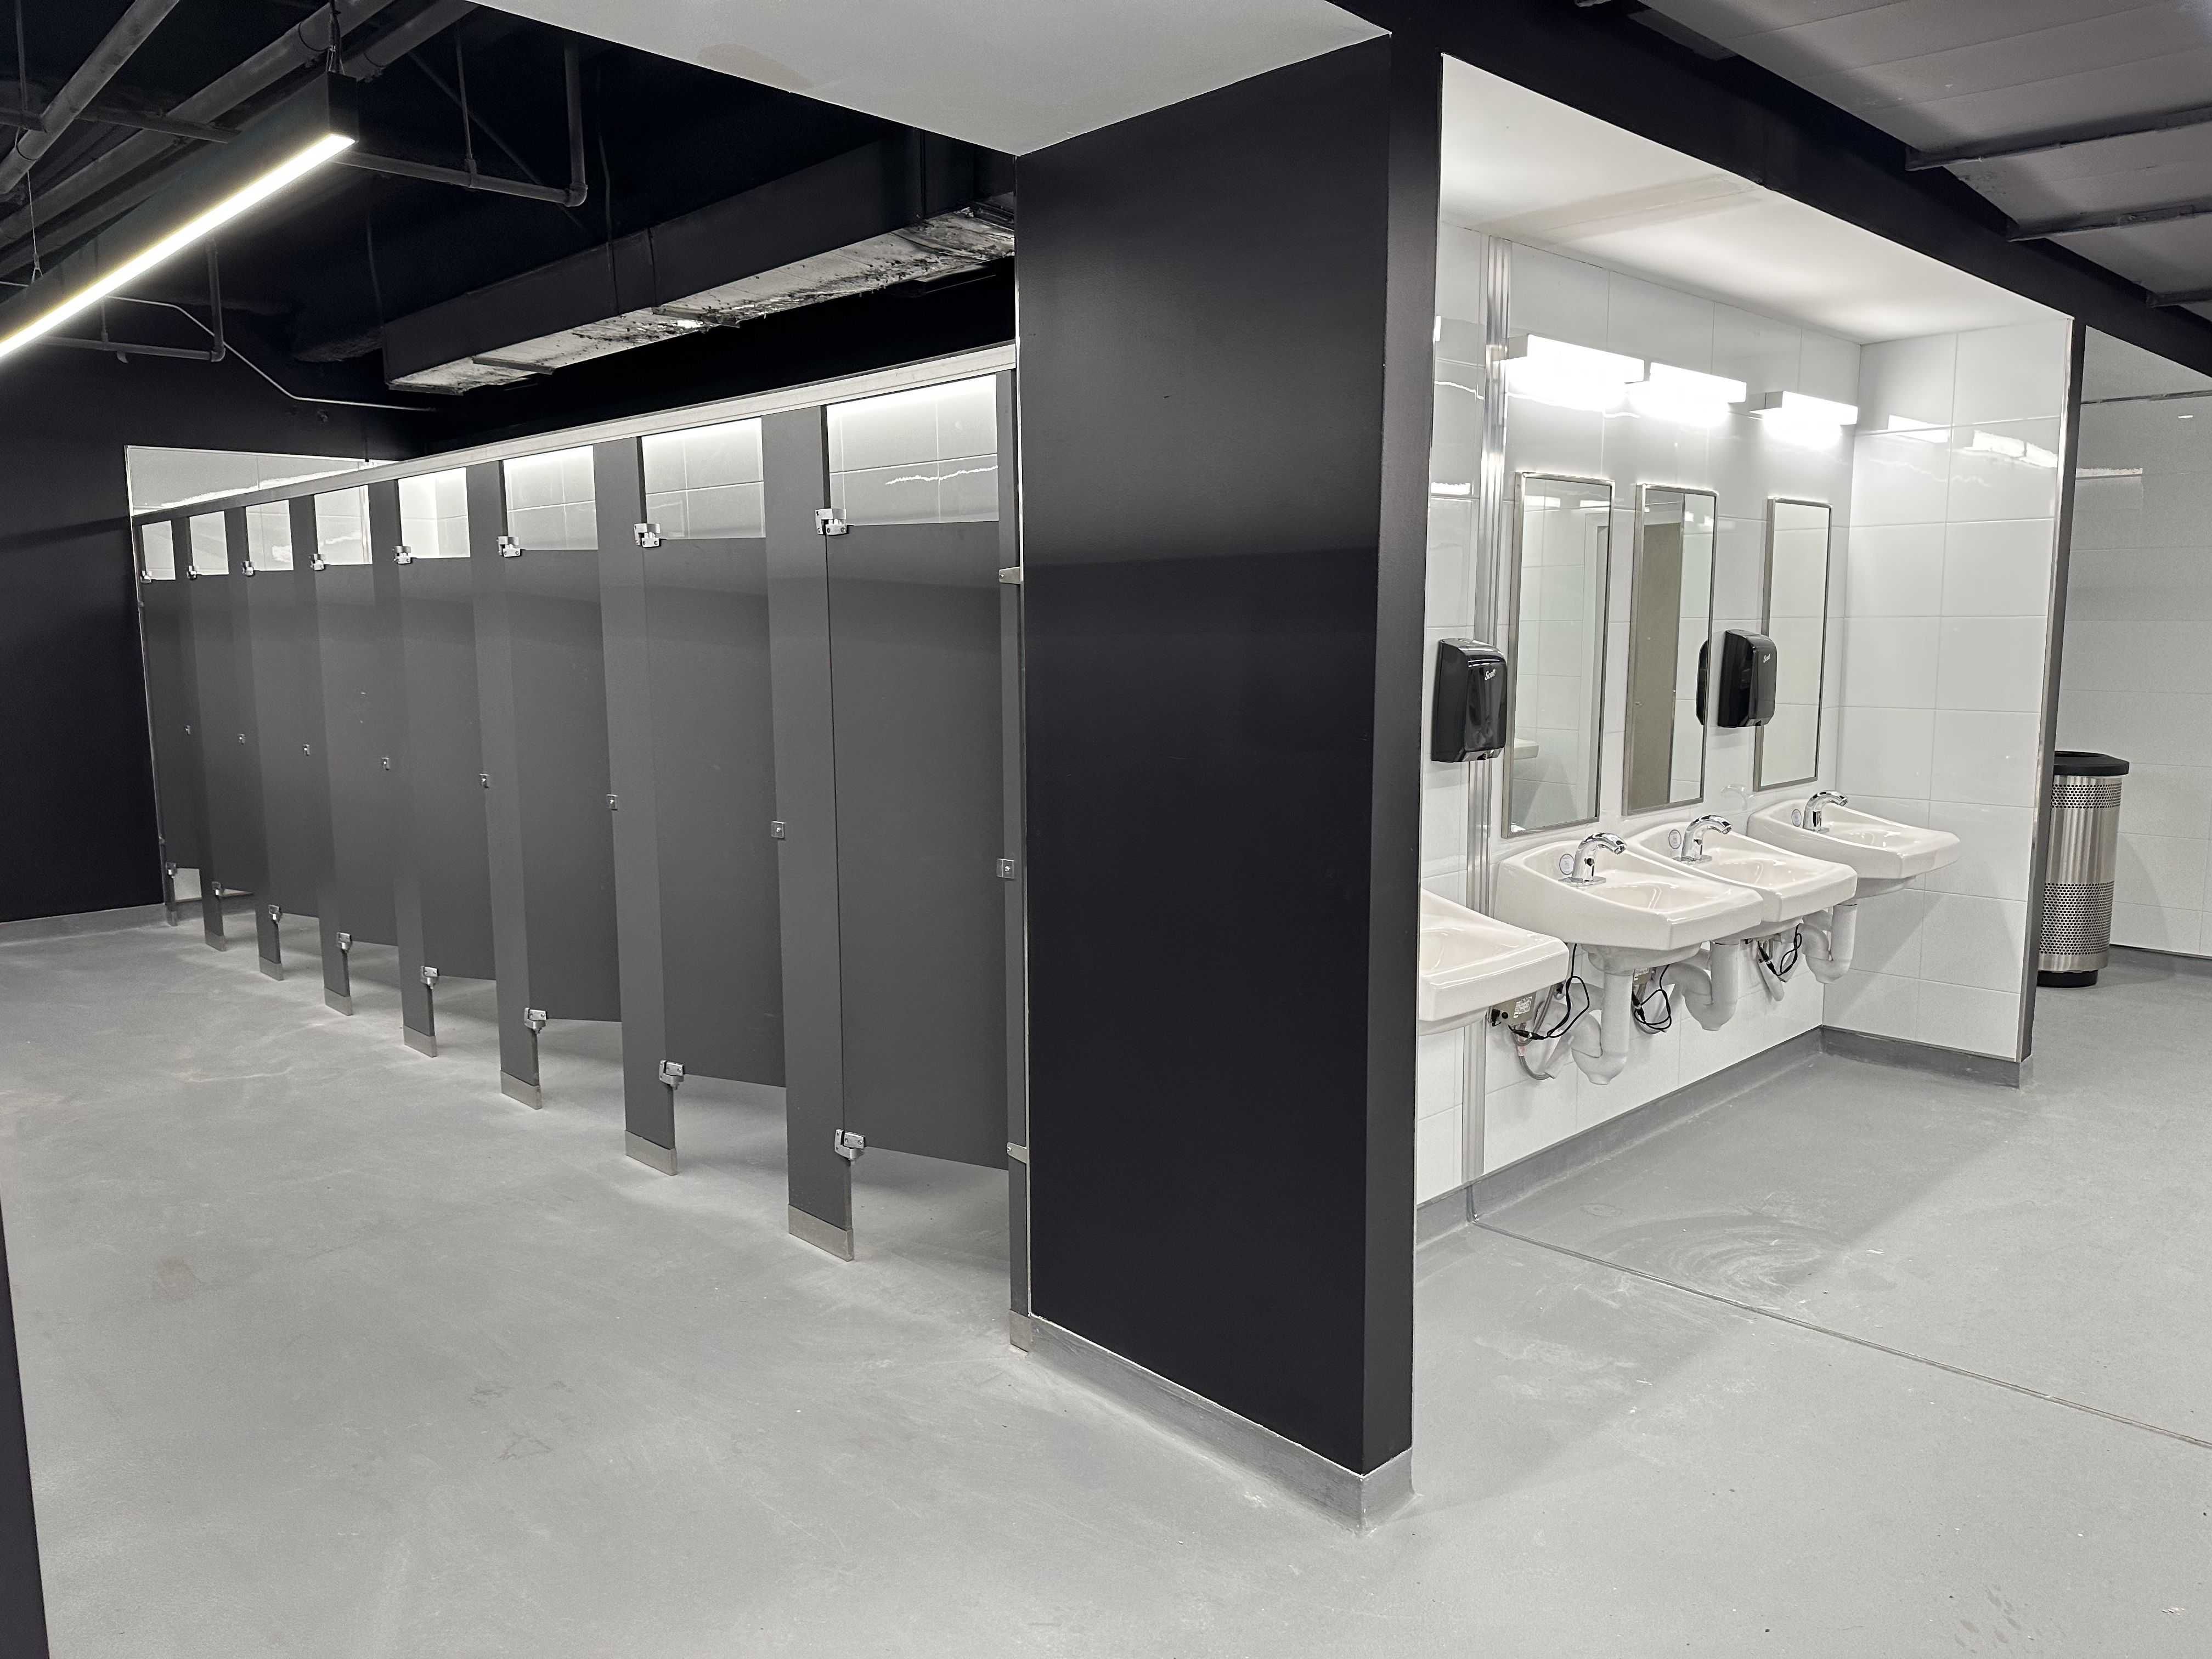 Photo shows one of the women's bathrooms in the Superdome